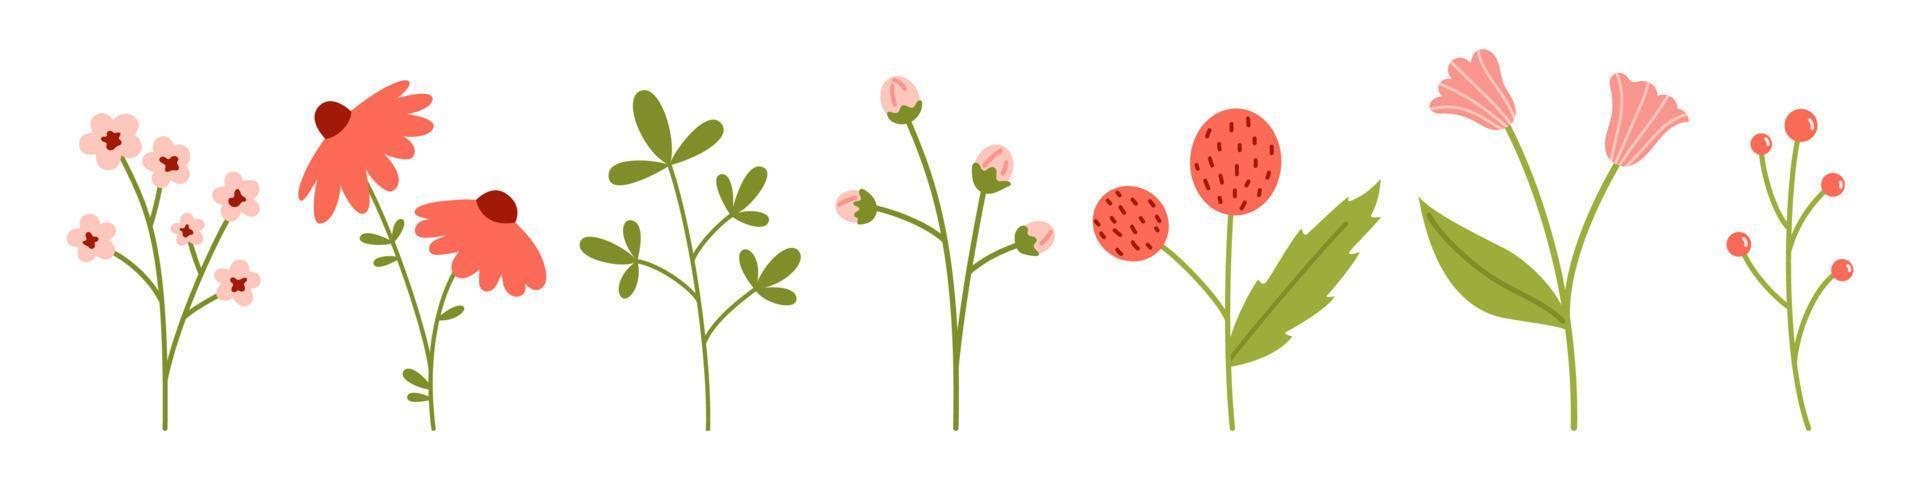 Vector set of various flowers in flat design. Collection of blooming flowers in soft pink and red color. Floral illustration. Spring botanical elements.